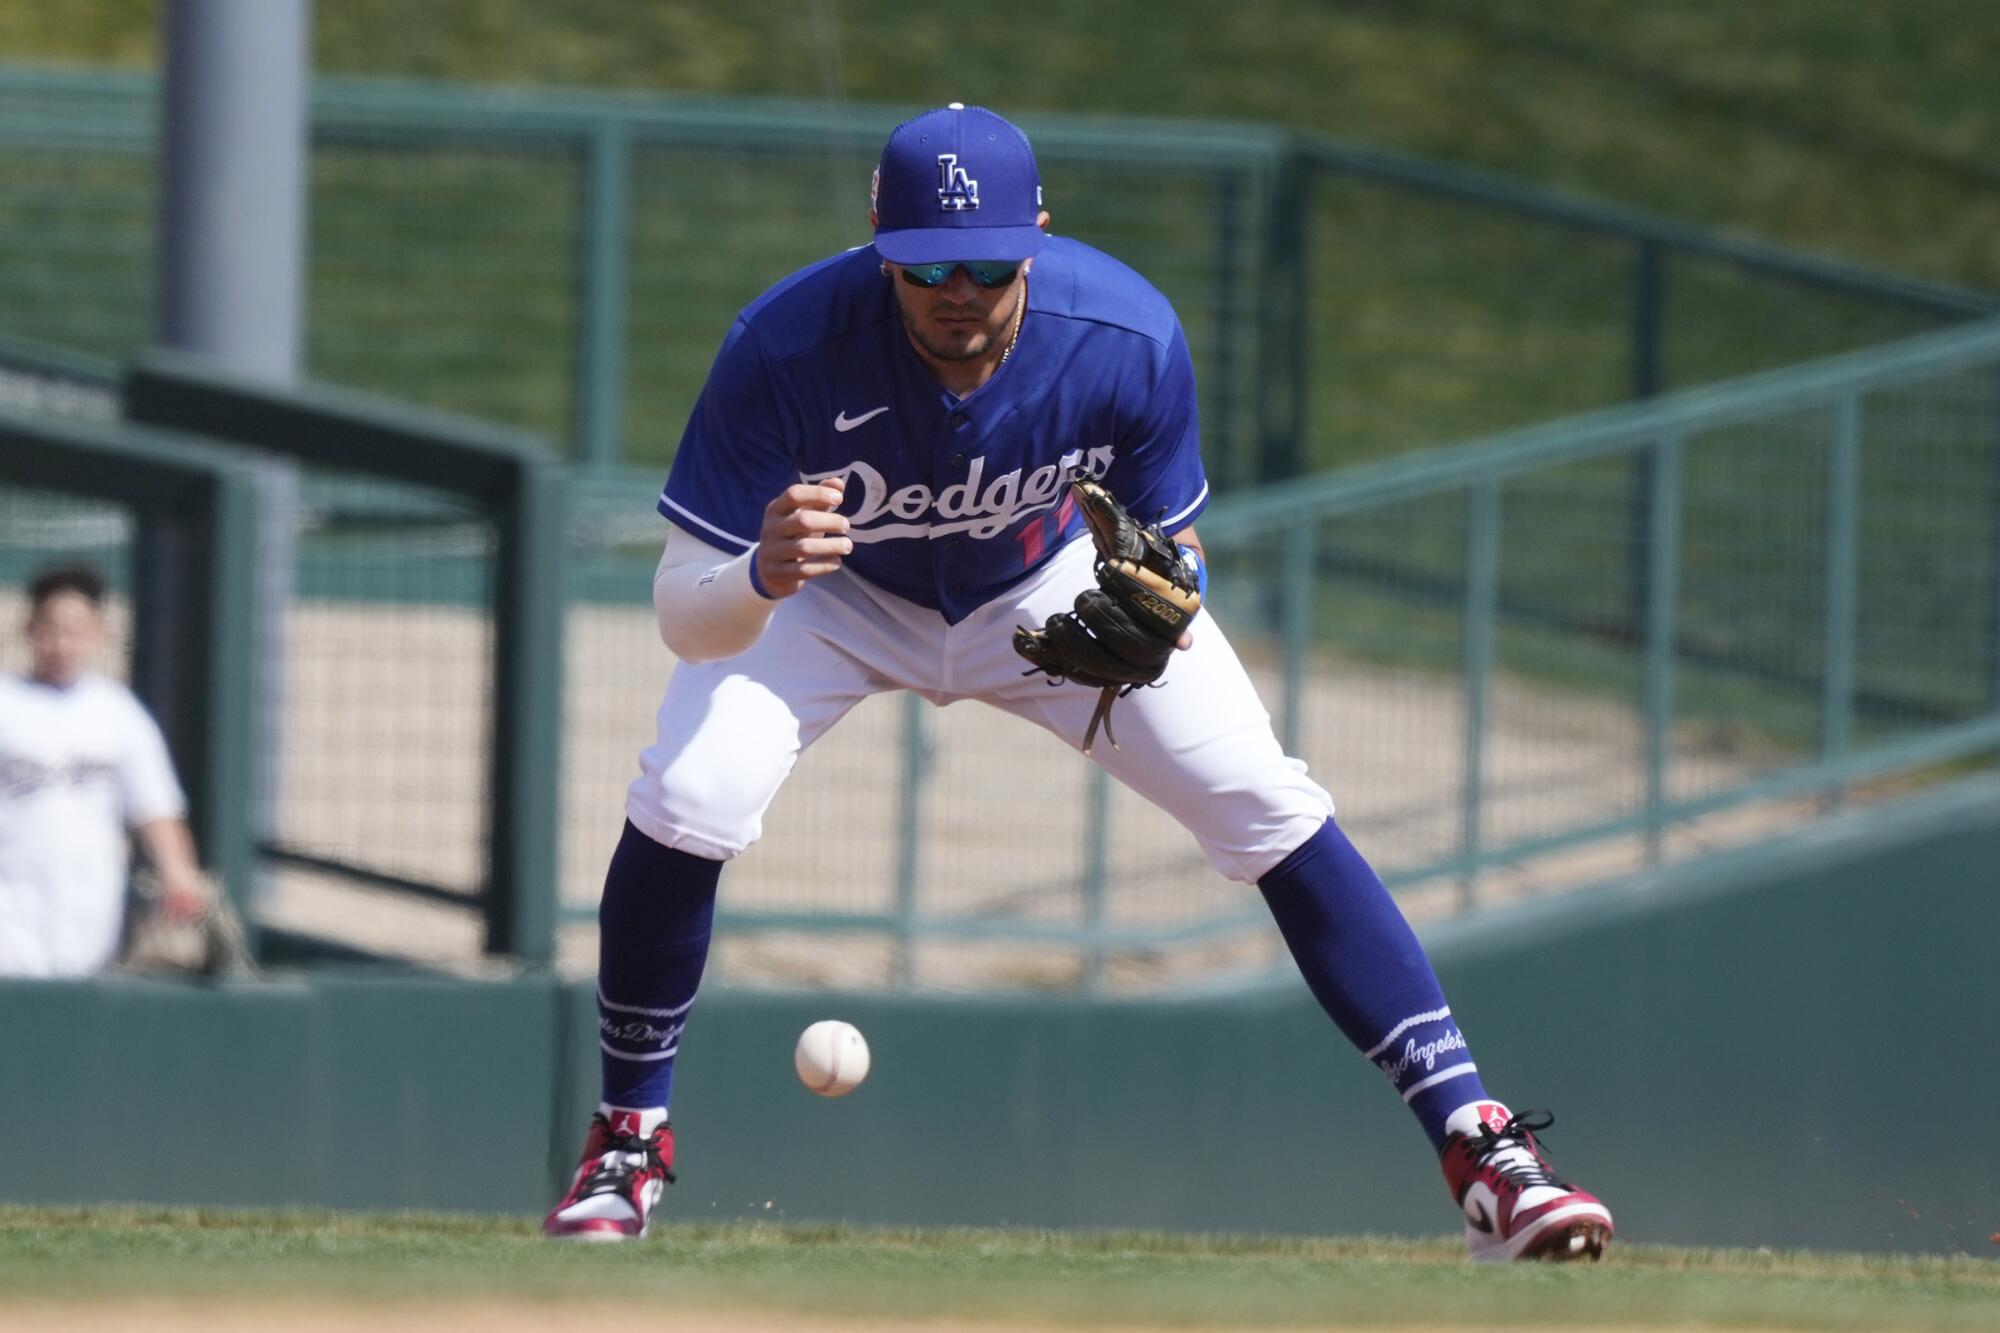 Miguel Rojas trade: Marlins send shortstop to Dodgers for infield